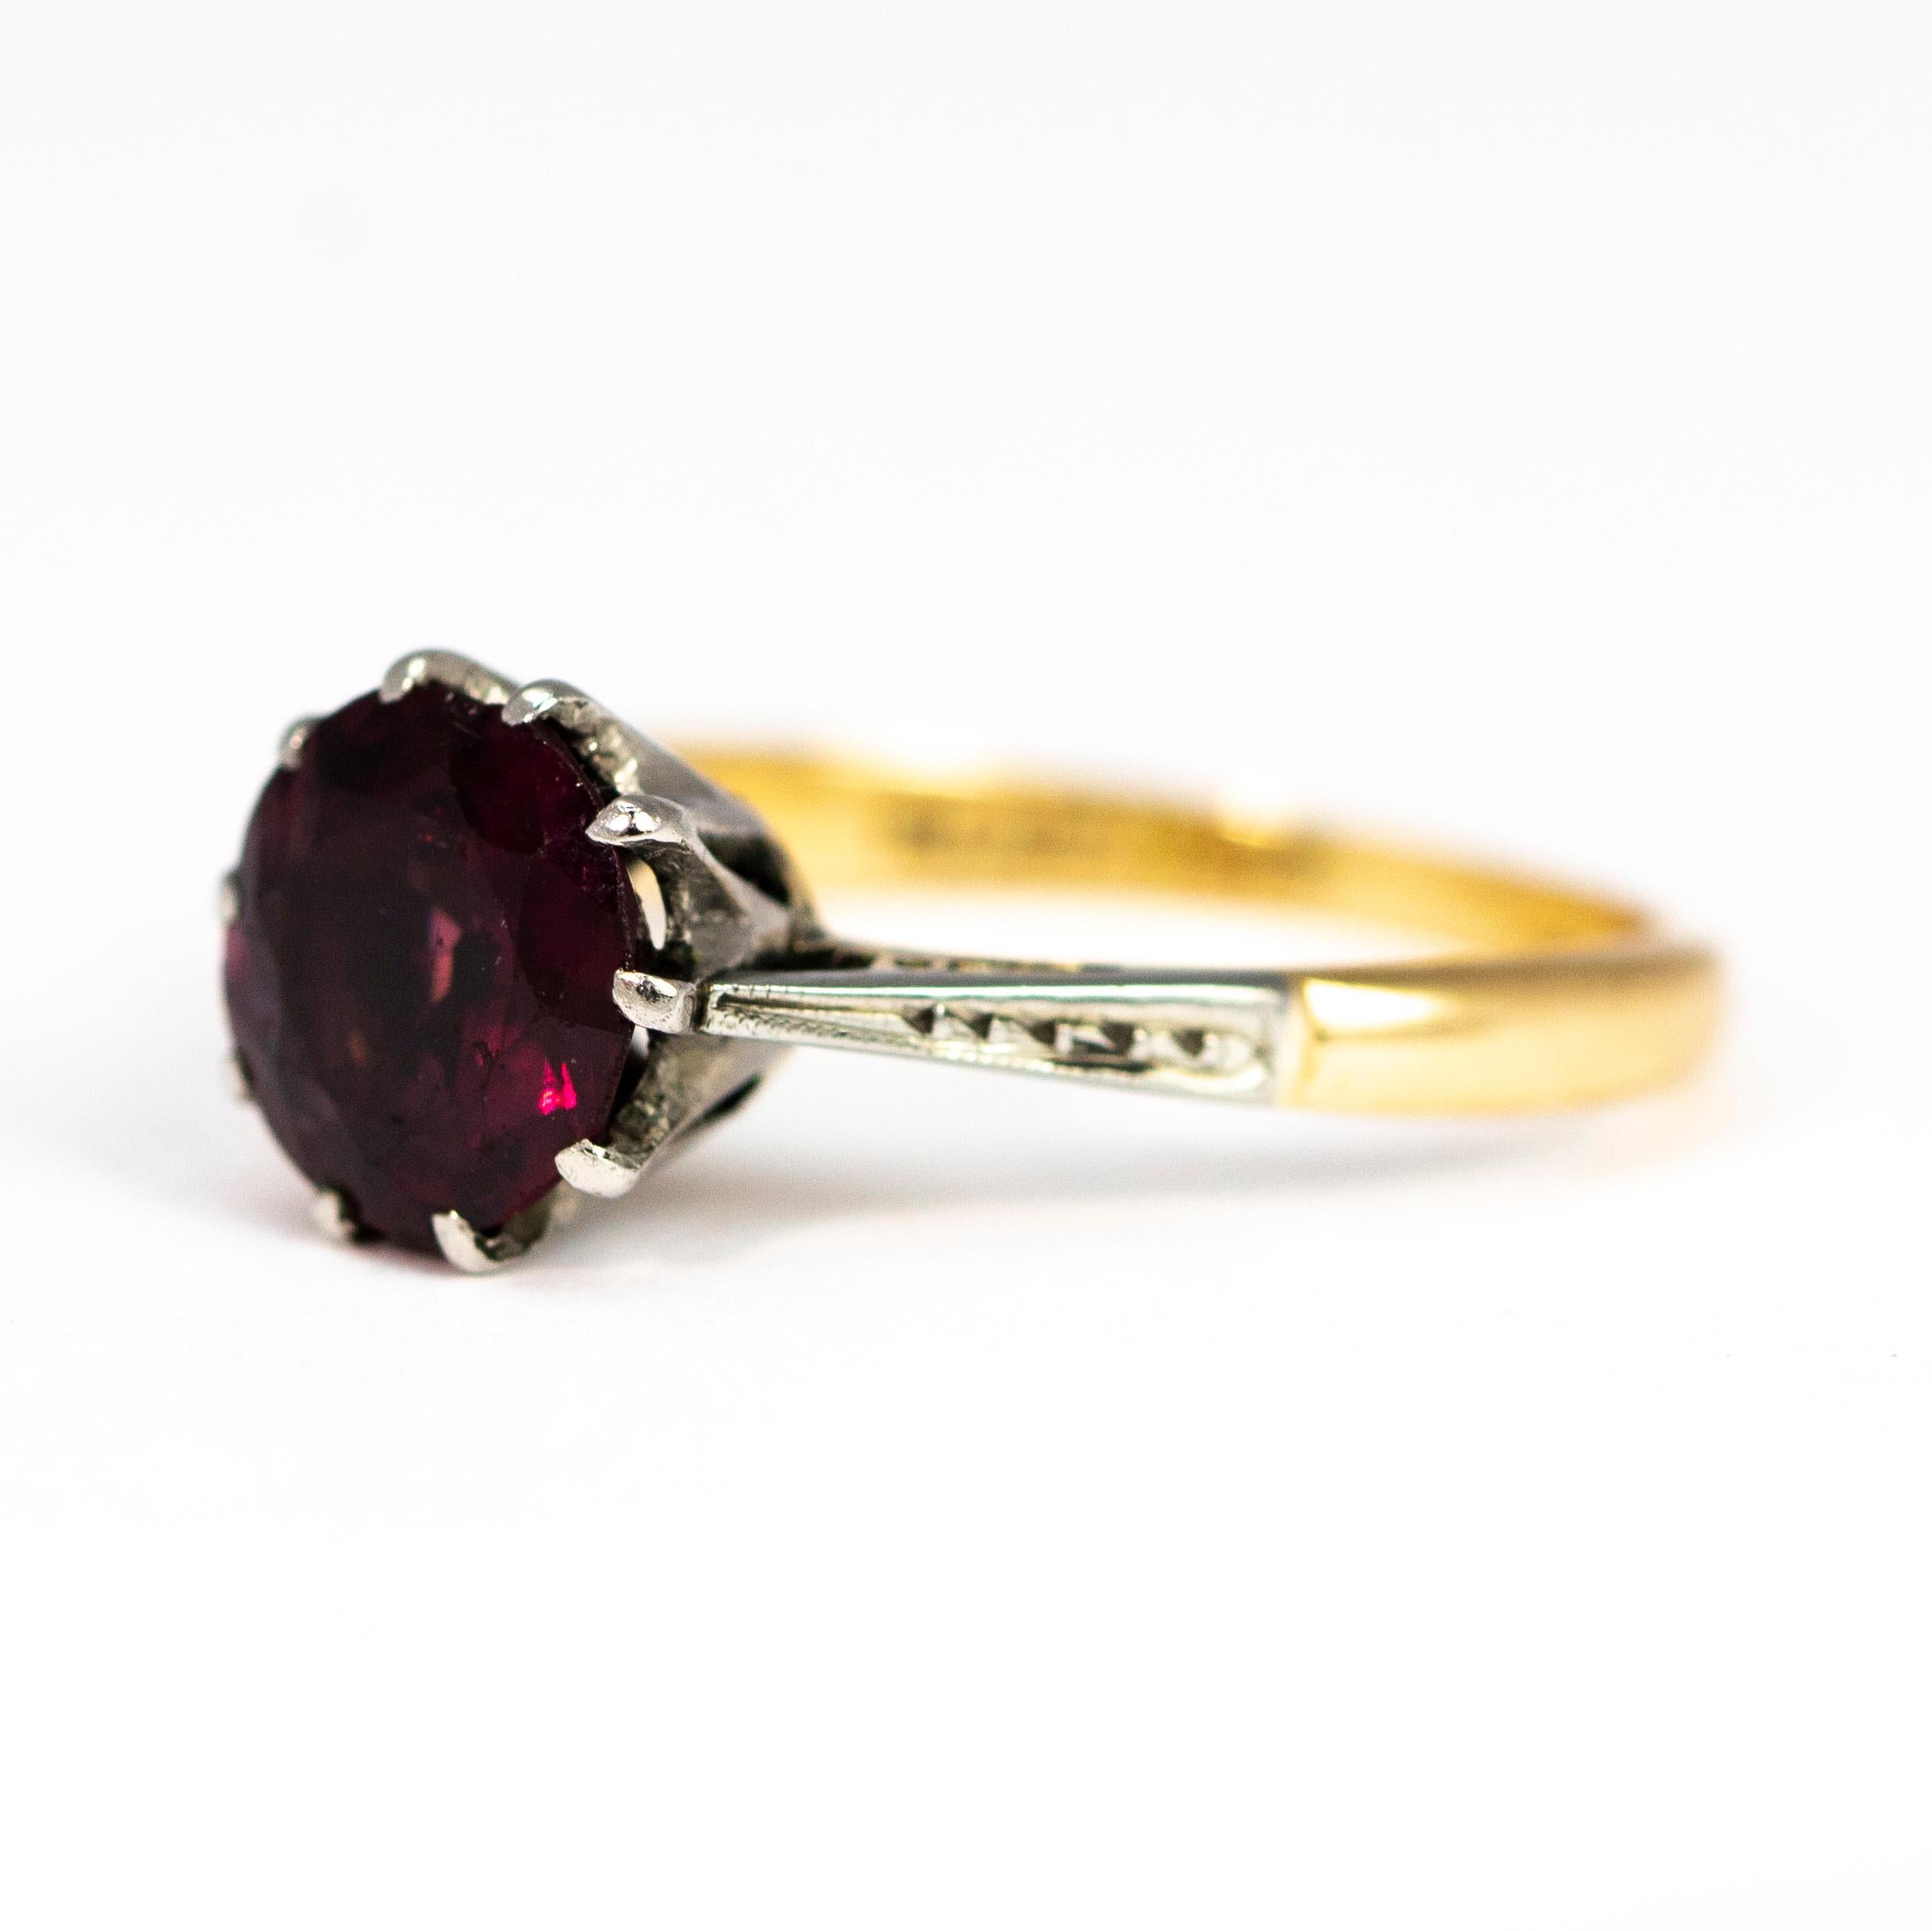 This striking solitaire holds a deep pink tourmaline stone measuring 2carats. The stone is held in a simple claw setting modelled in platinum. 

Ring Size: M 1/2 or 6 1/2

Weight: 3.43g 